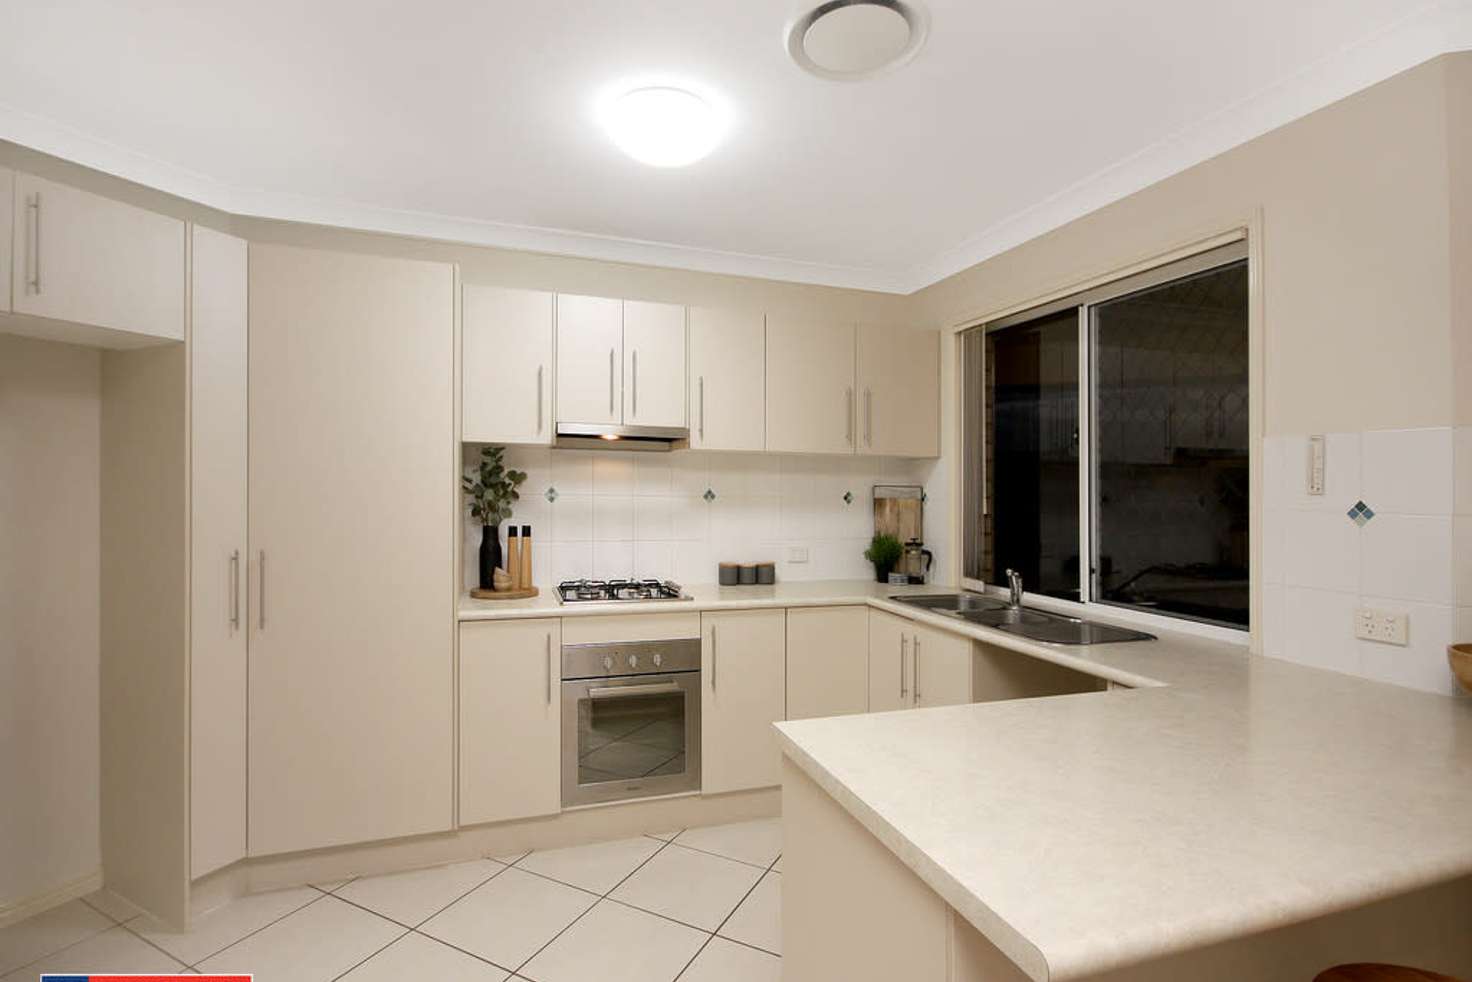 Main view of Homely house listing, 2 Benjamin Court, Yamanto QLD 4305